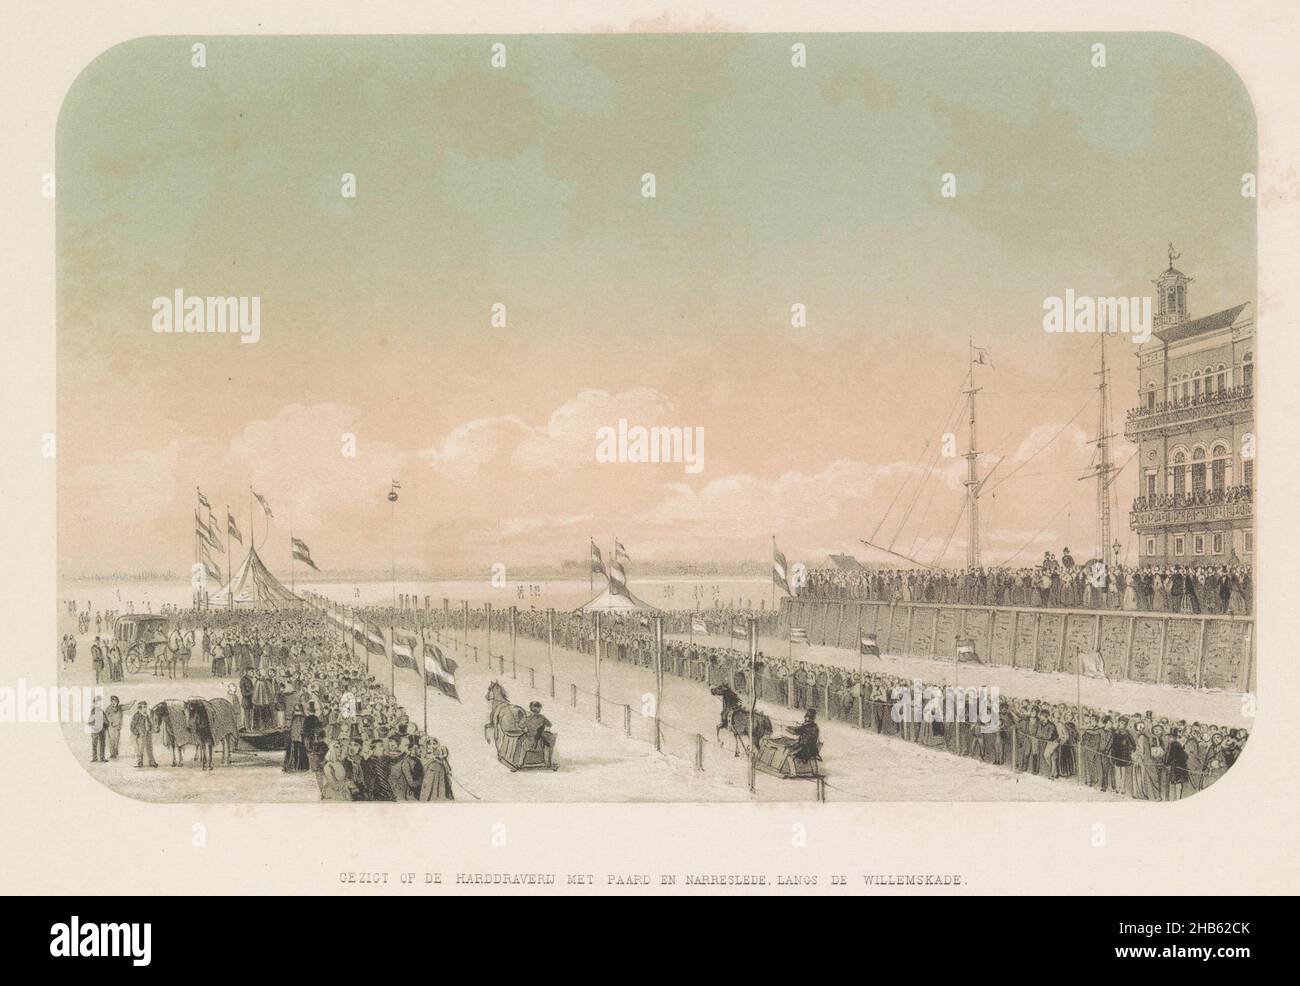 Contest for Sleigh Drivers on the river Maas in Rotterdam, 1855, View of the horse and carriage race along the Willemskade (title on object), The ice pleasure on the river Maas in Rotterdam in February 1855, with captions (series title on object), Contest for Sleigh Drivers on the river Maas along the Willemskade in Rotterdam. Fourth slide in a book with six slides on the ice fun on the river Maas in Rotterdam in February 1855. This copy republished in 1861 for the benefit of the victims of the flood., print maker: Gerardus Johannes Bos (mentioned on object), printer: Pieter Willem Marinus Stock Photo